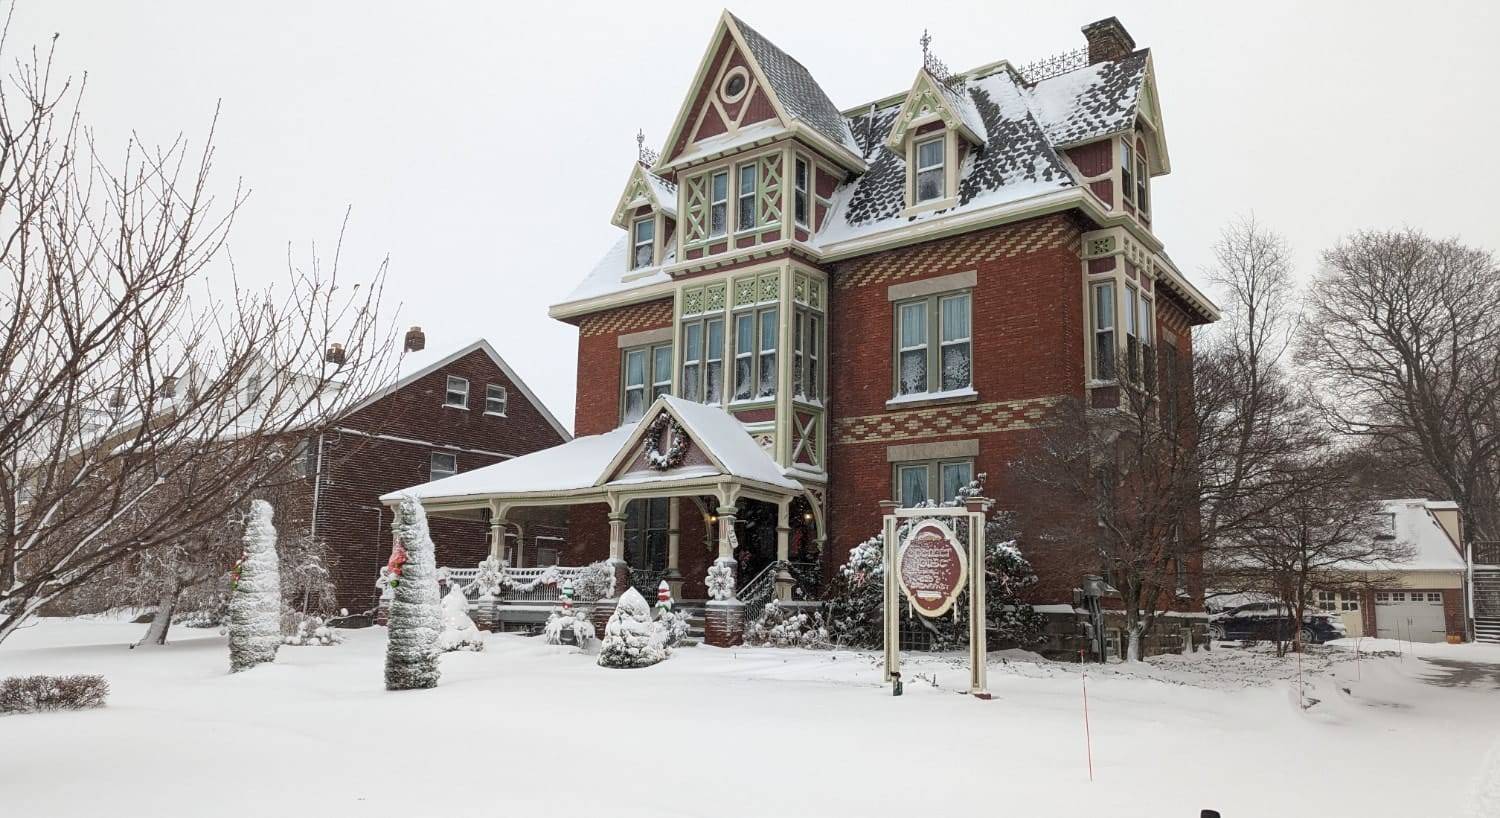 Exterior view of the property with red brick and white trim in the winter with snow all around